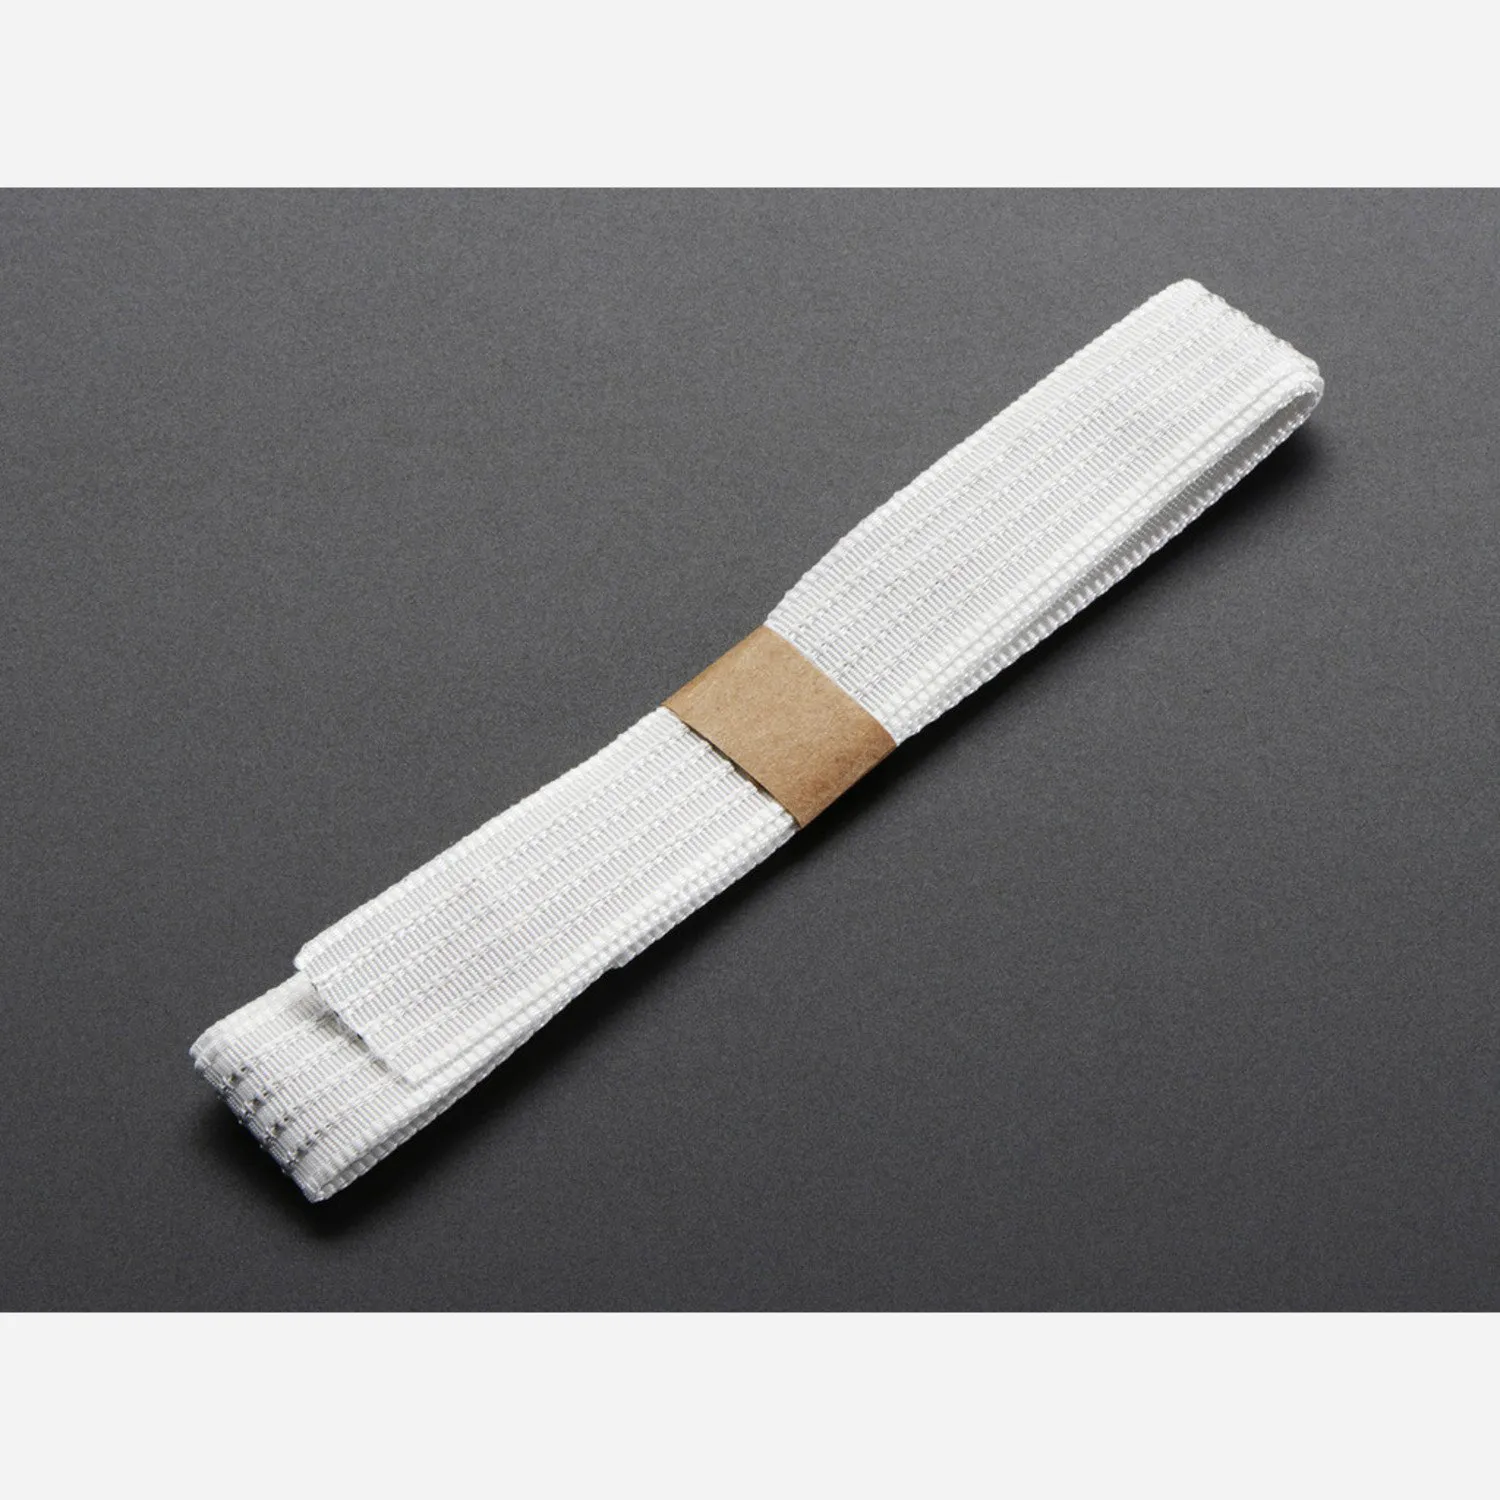 Photo of Conductive thread ribbon cable - White - 1 yard